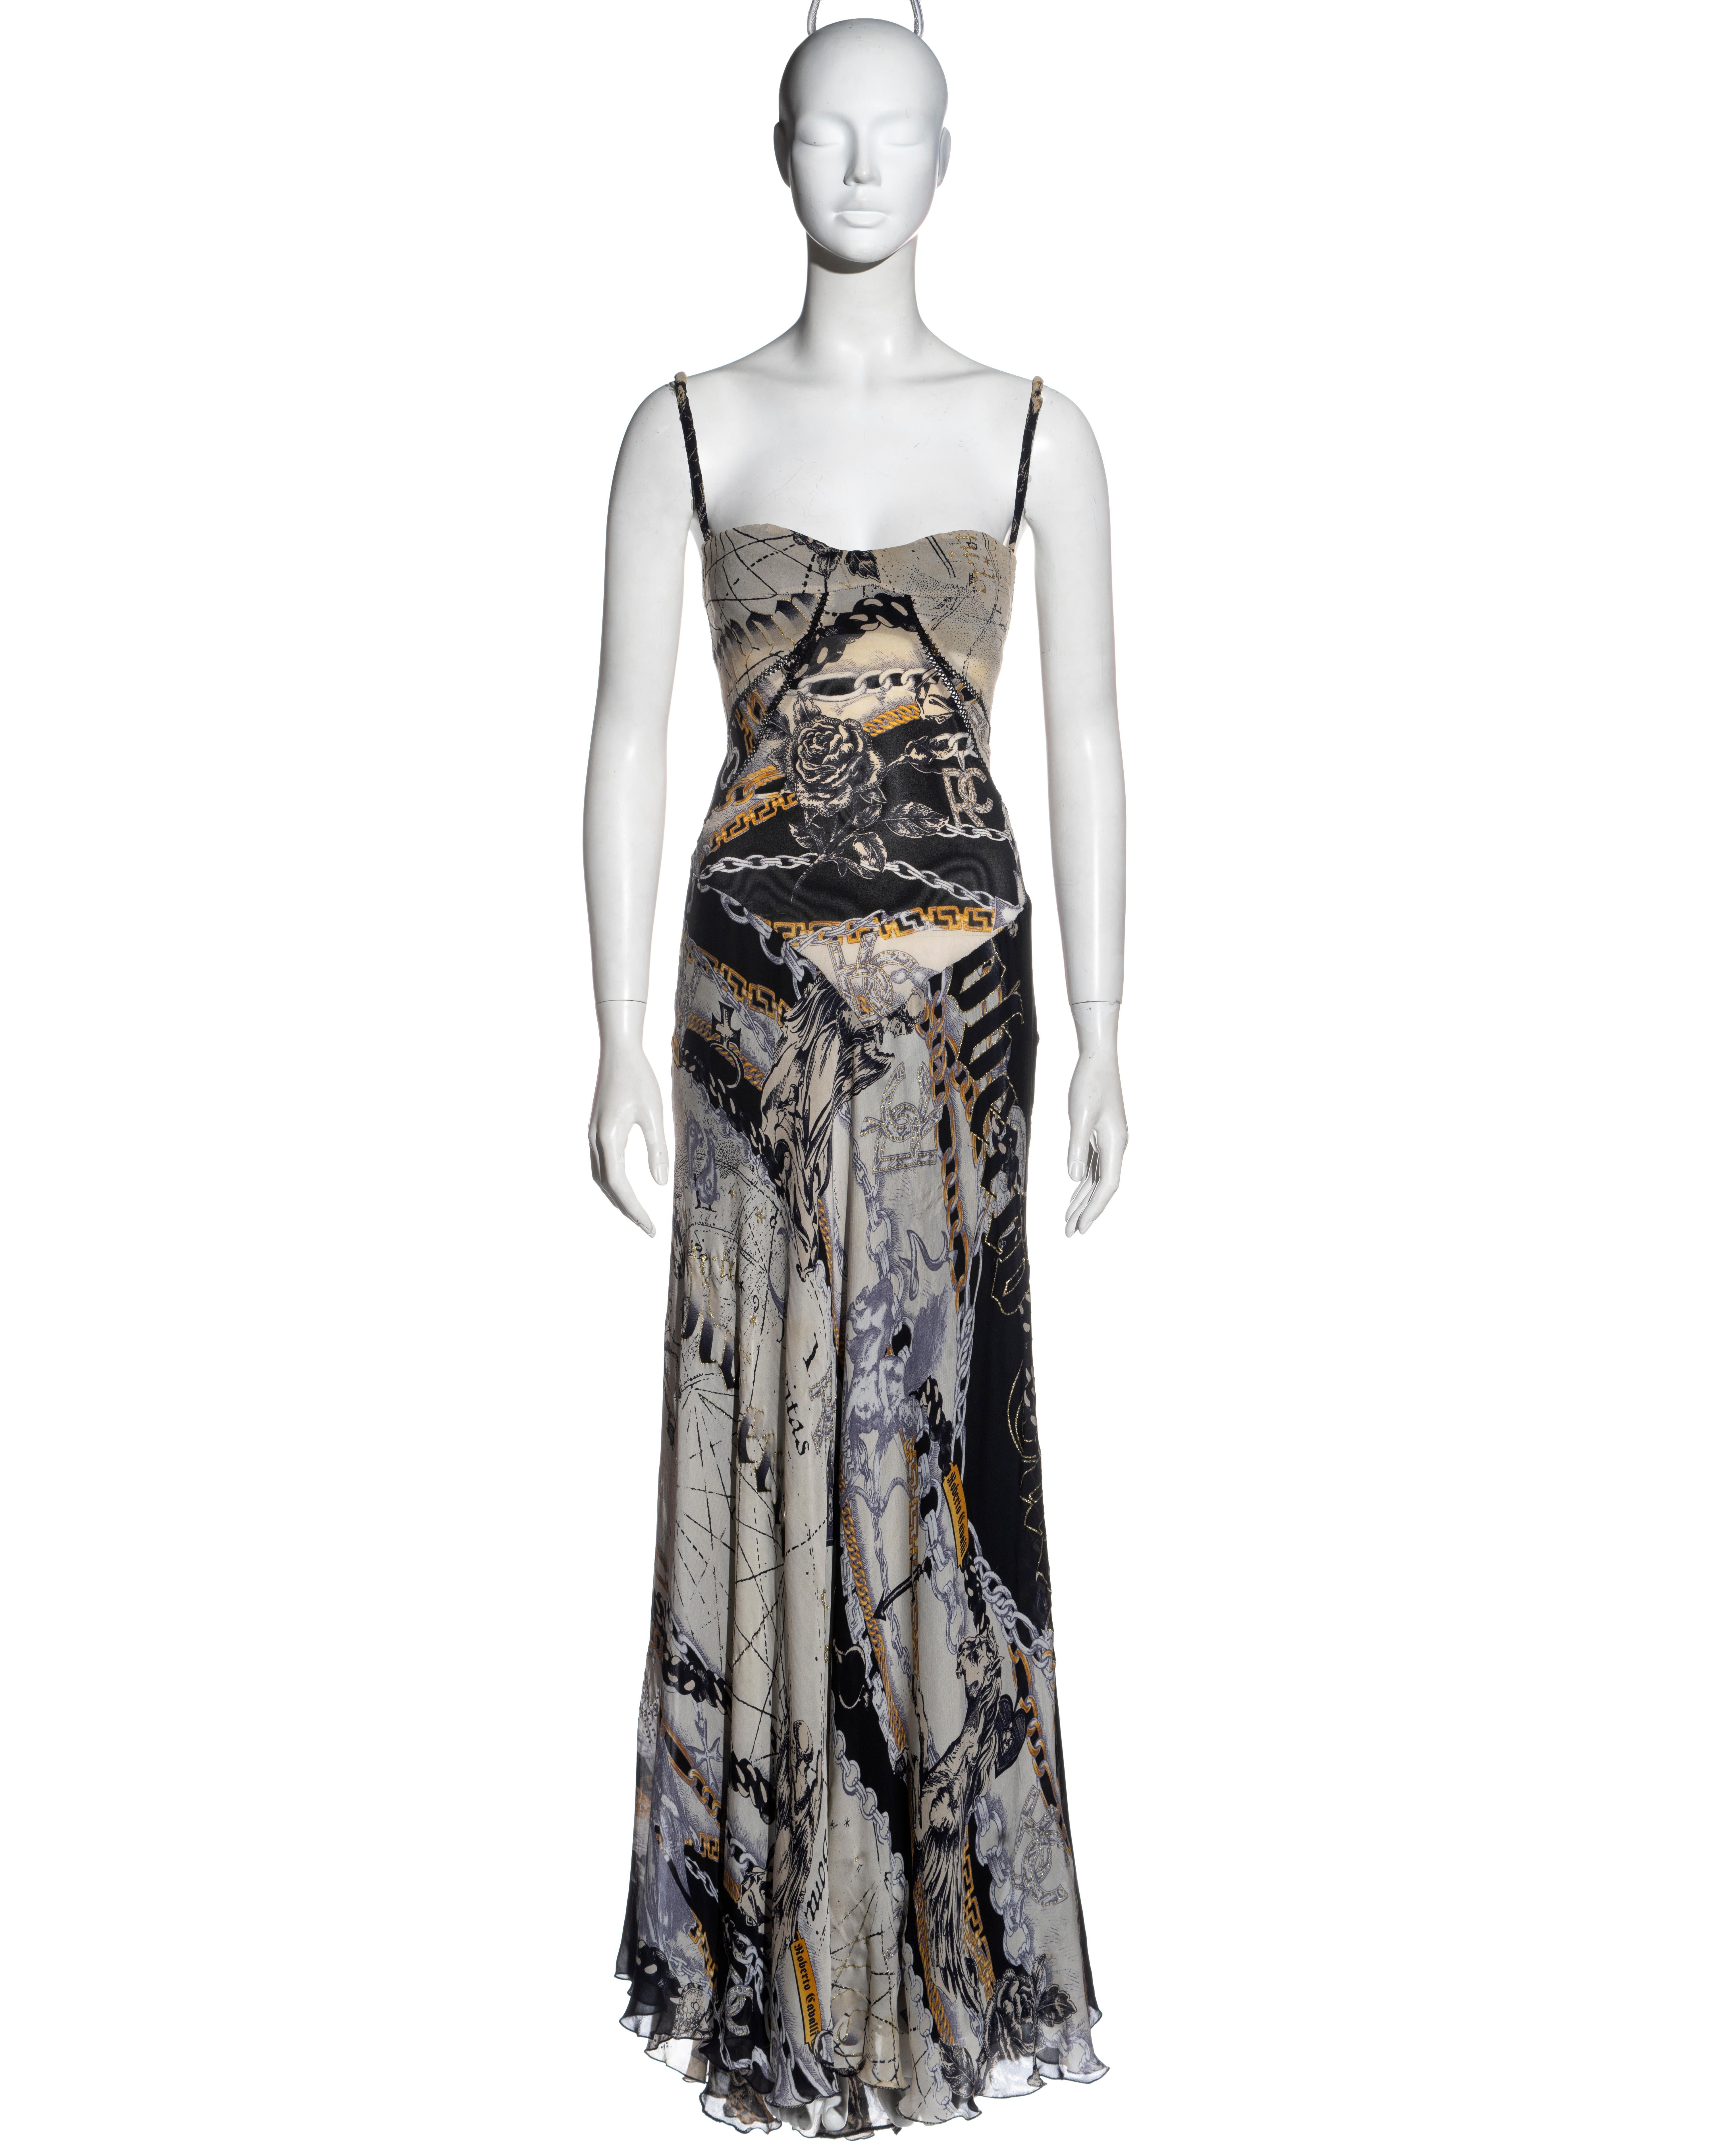 ▪ Roberto Cavalli zodiac printed silk evening dress
▪ Zodiac print with chains, roses and gothic text 
▪ Gold glitter detail on parts of the fabric 
▪ Corset lace-up fastening 
▪ Built-in bra
▪ Floor-length skirt with train 
▪ Open seams with